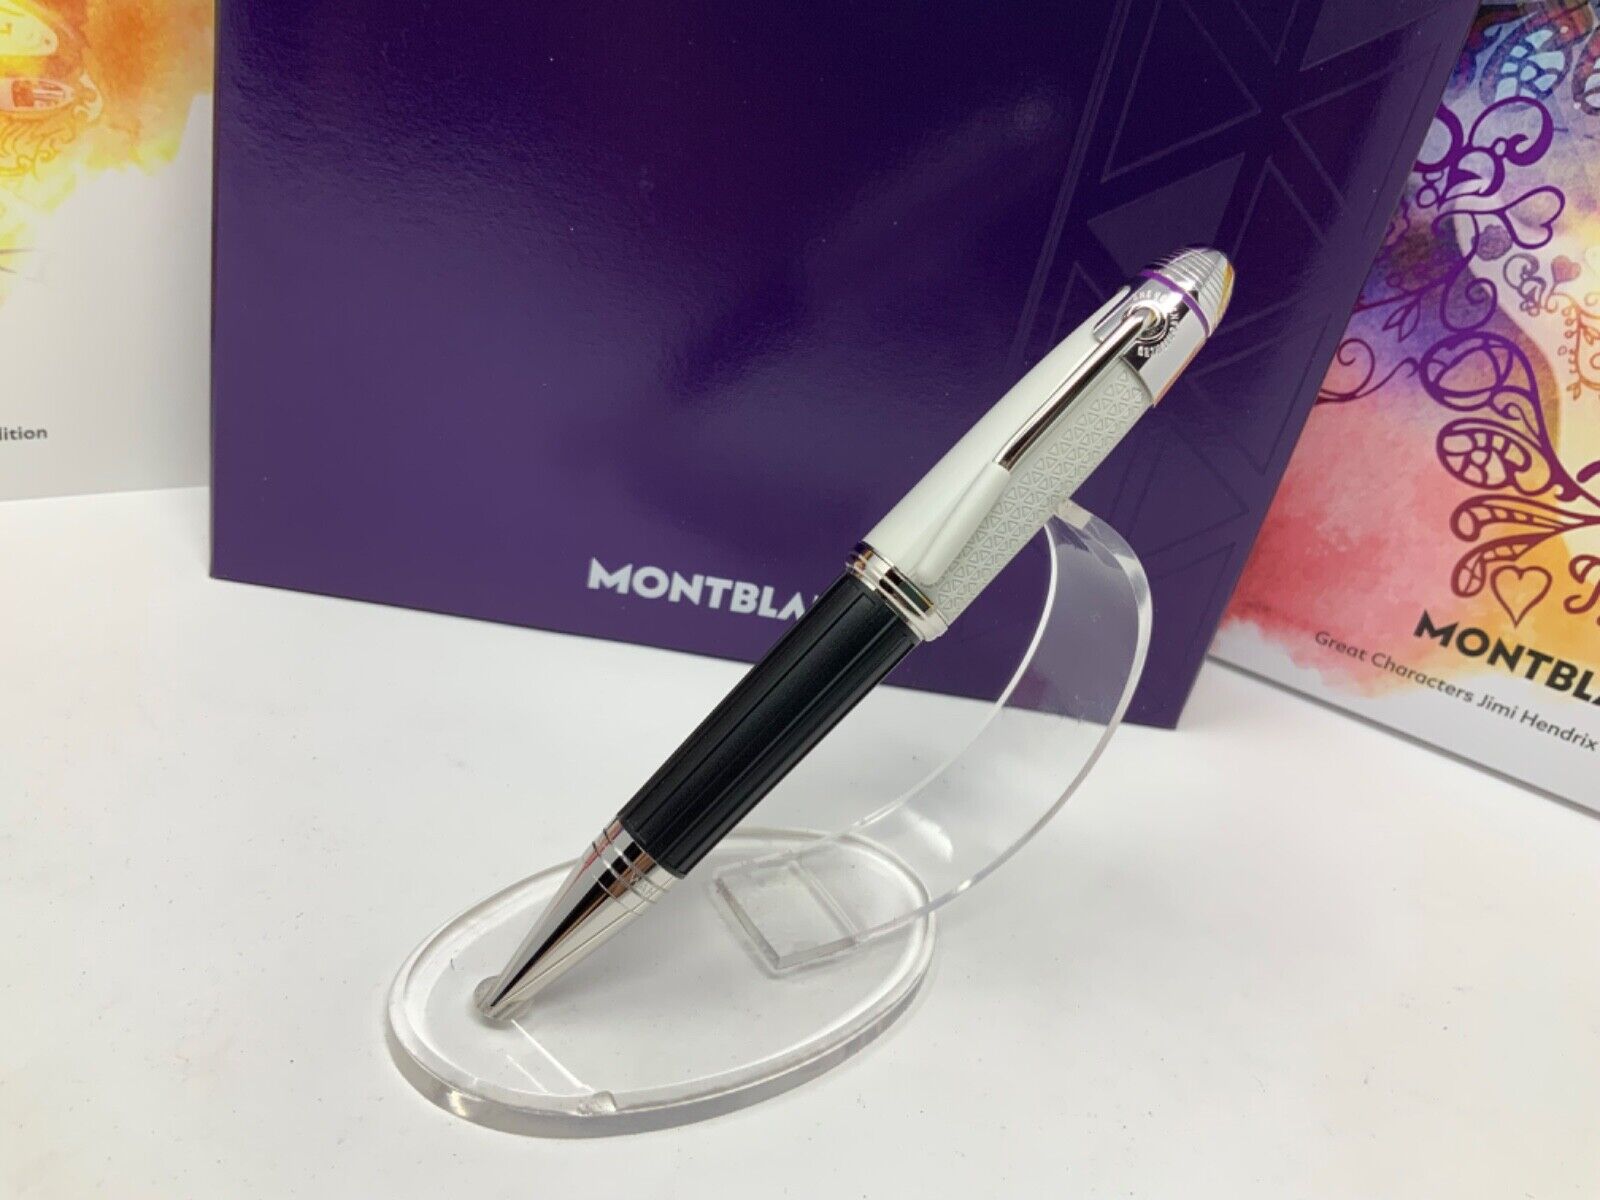 MONTBLANC JIMI HENDRIX Great Characters Special Edition Ballpoint pen